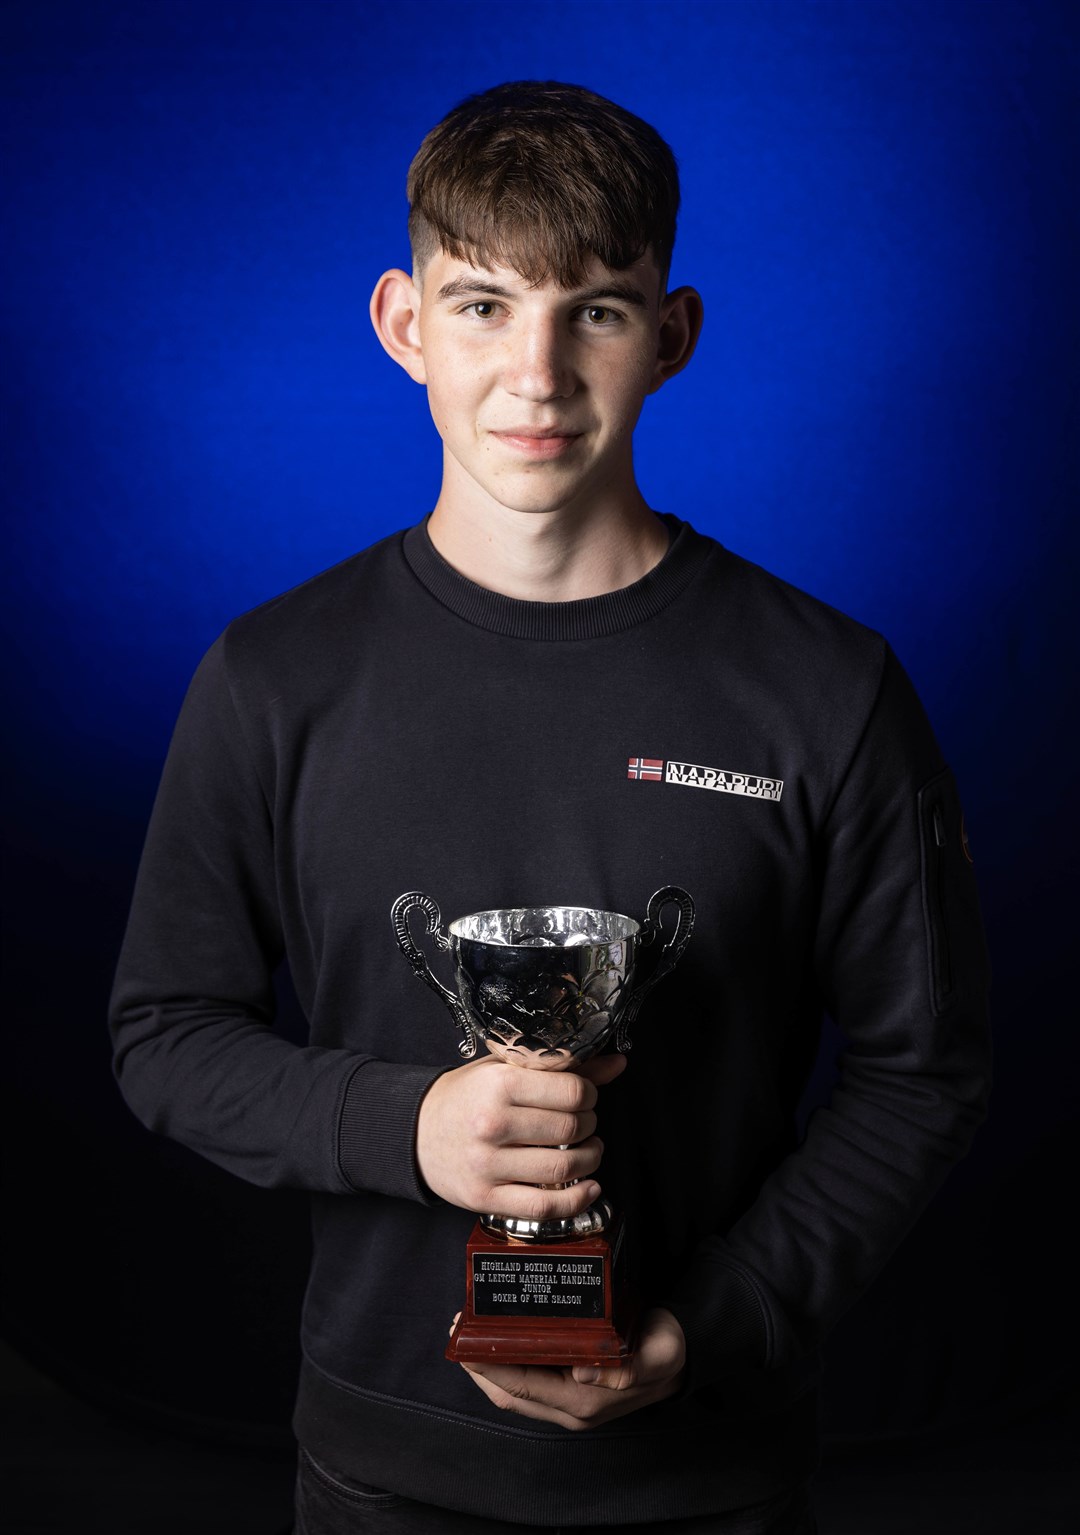 Andrew Mclaughlan won junior boxer of the year at Highland Boxing Academy's 2022/23 awards night.